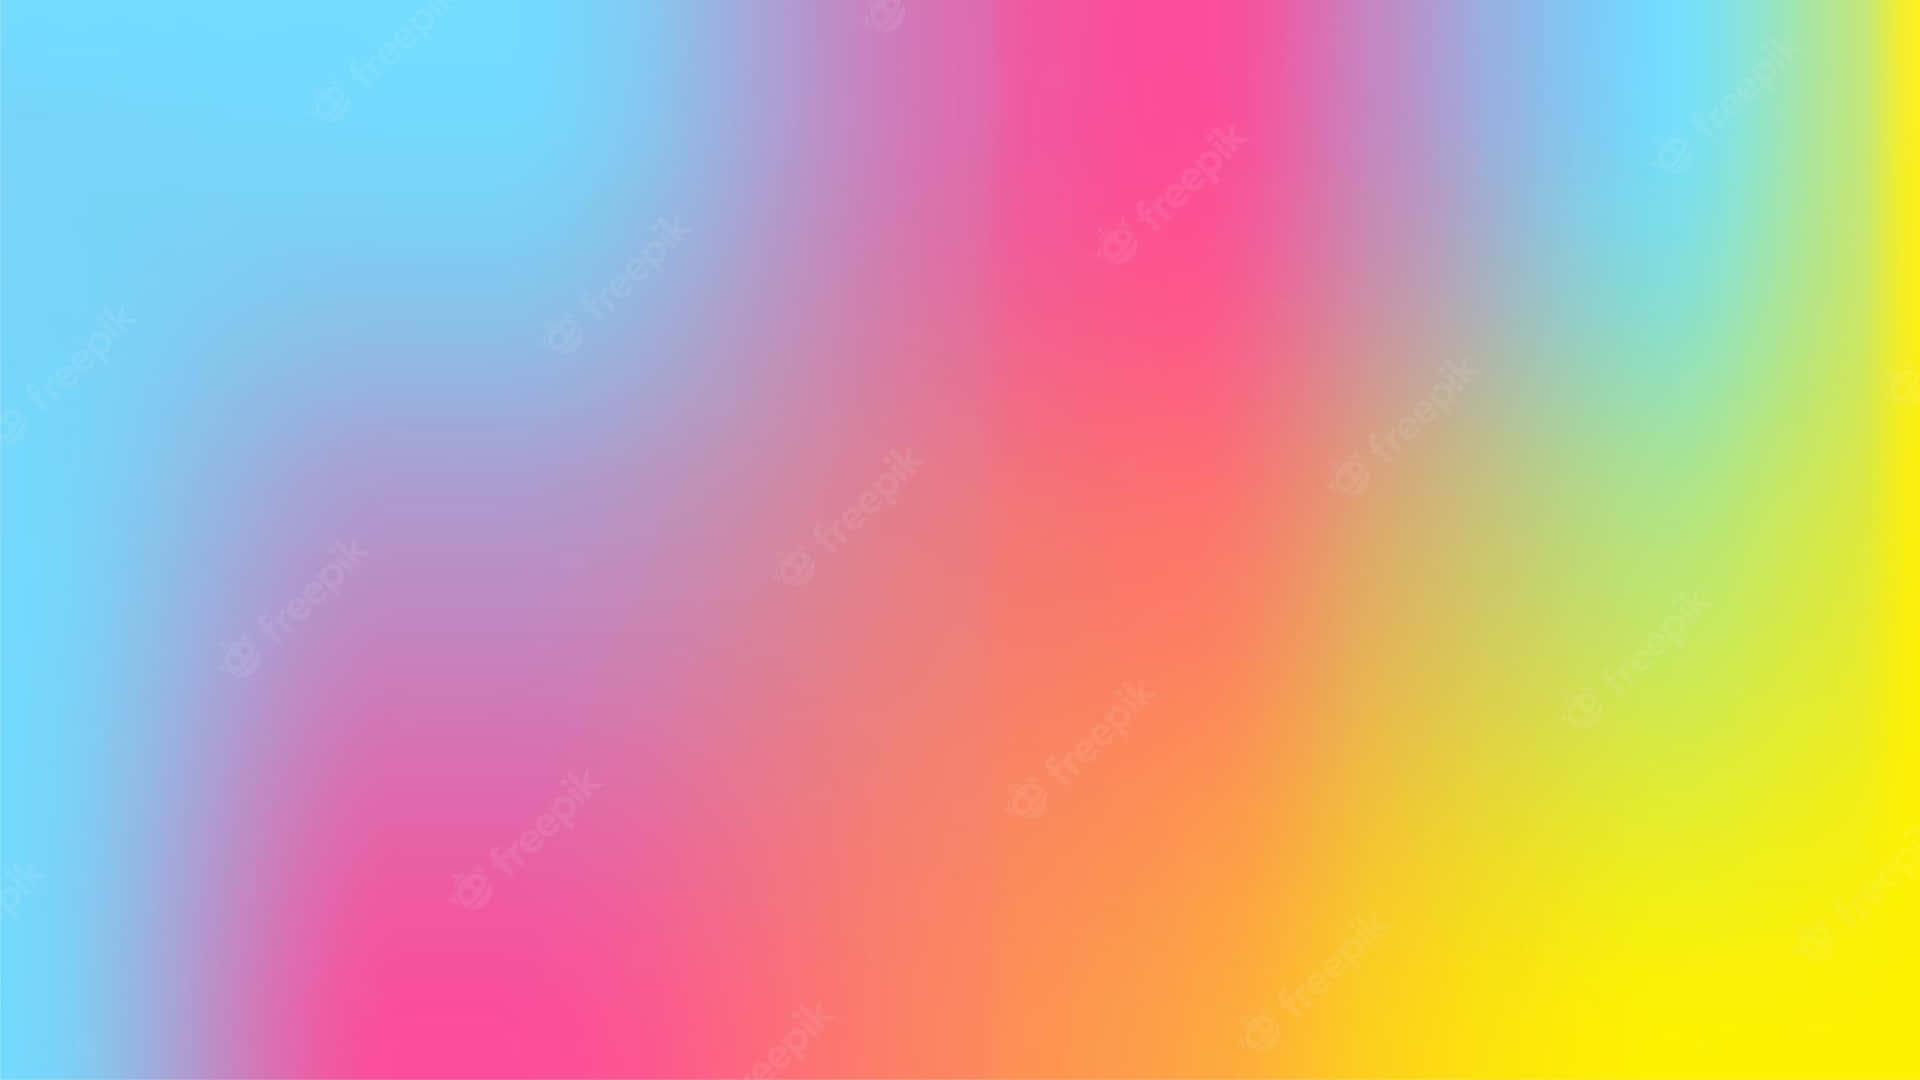 A Vibrant Color Combination of Pink, Yellow and Blue Wallpaper